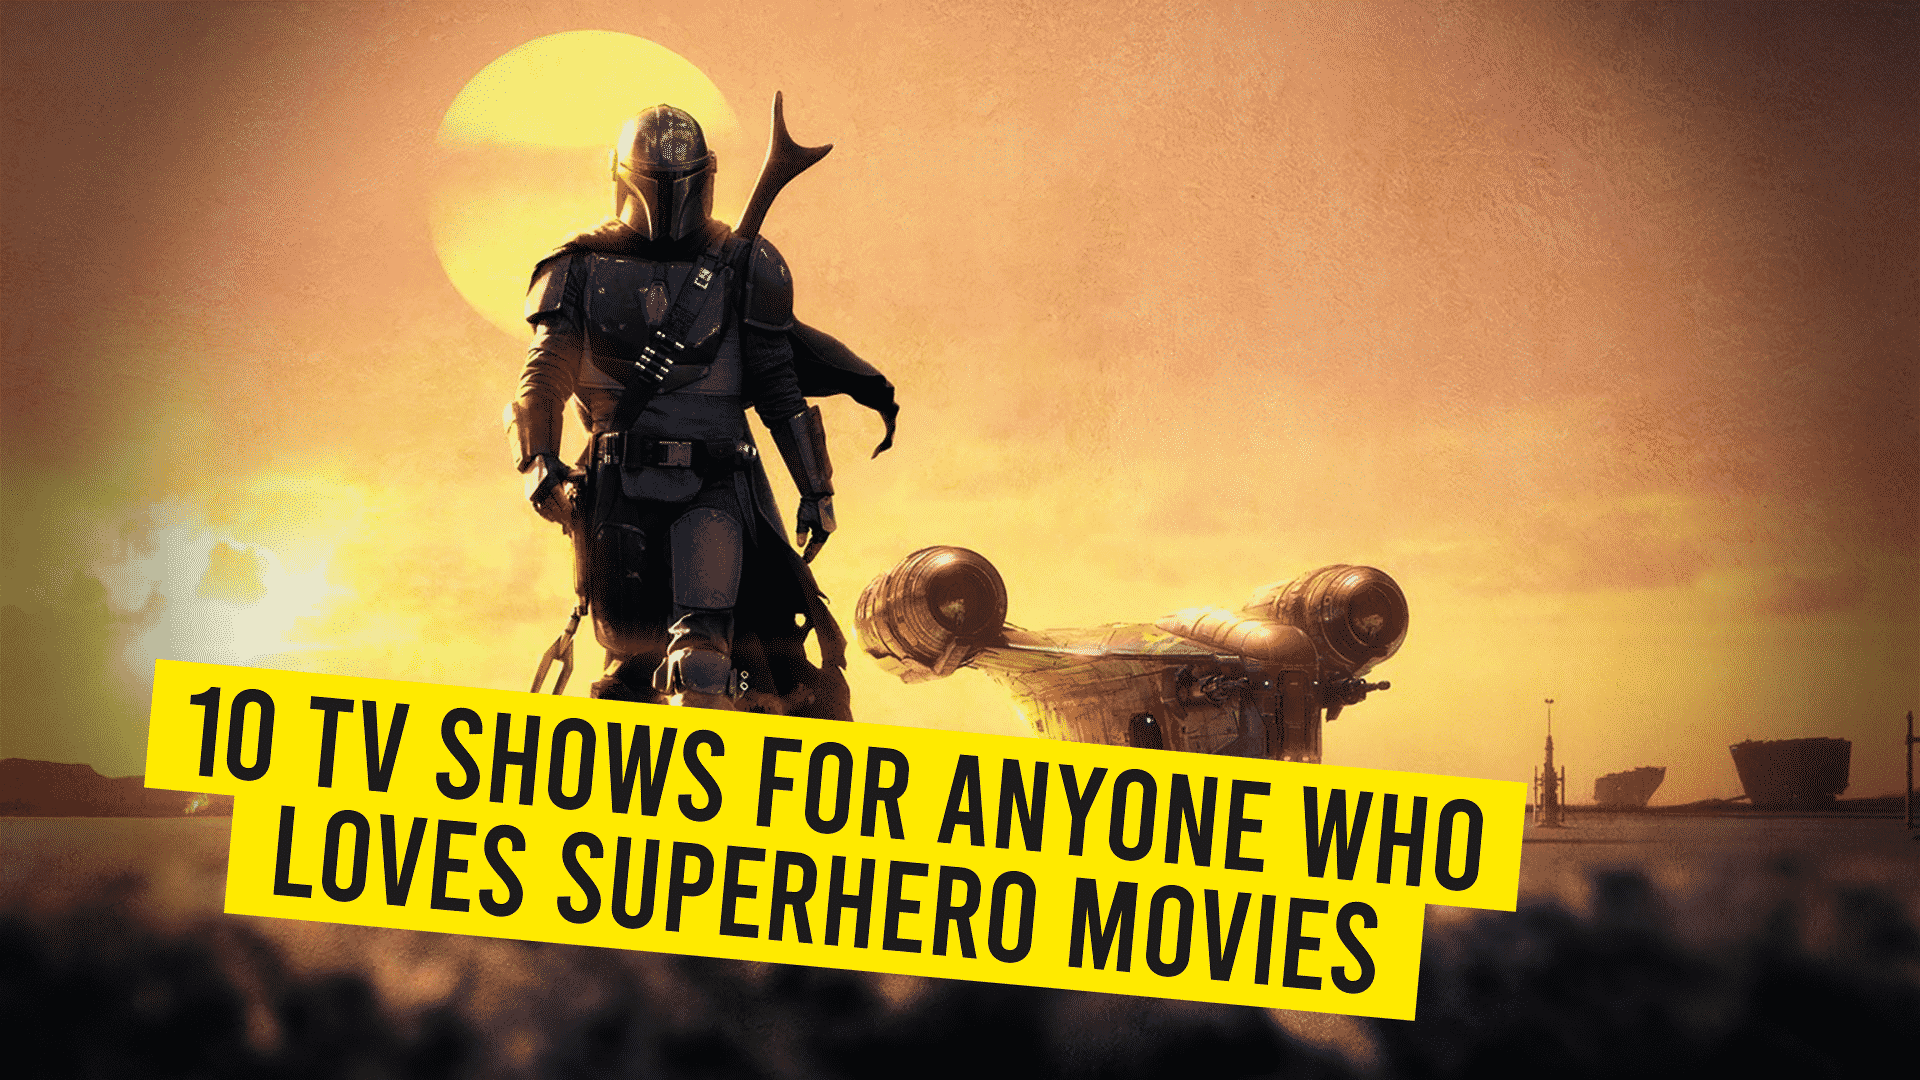 10 TV Shows For Anyone Who Loves Superhero Movies.